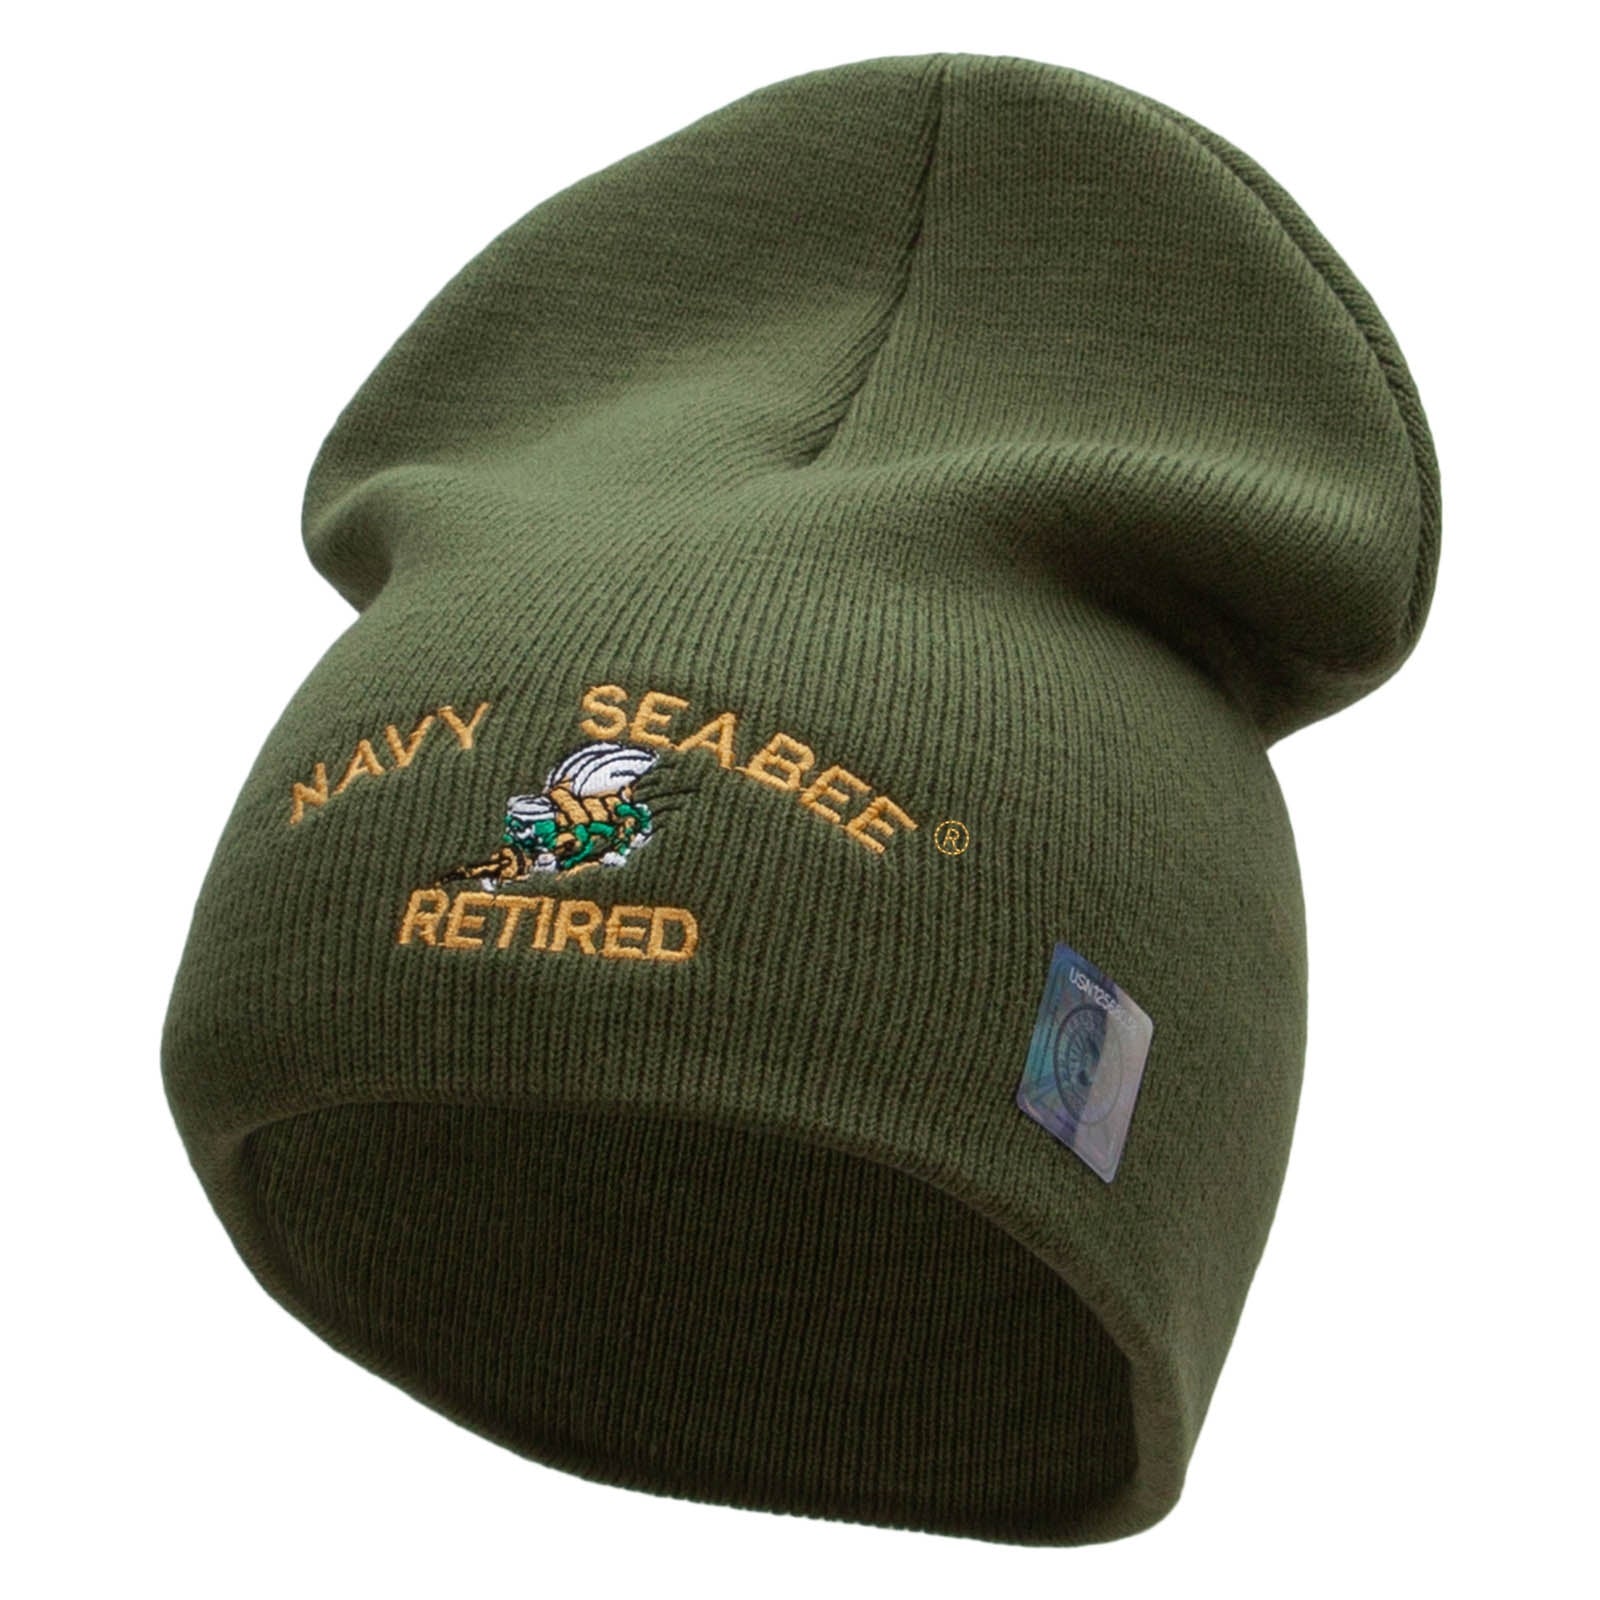 Licensed Navy Seabee Retired Embroidered Short Beanie Made in USA - Olive OSFM